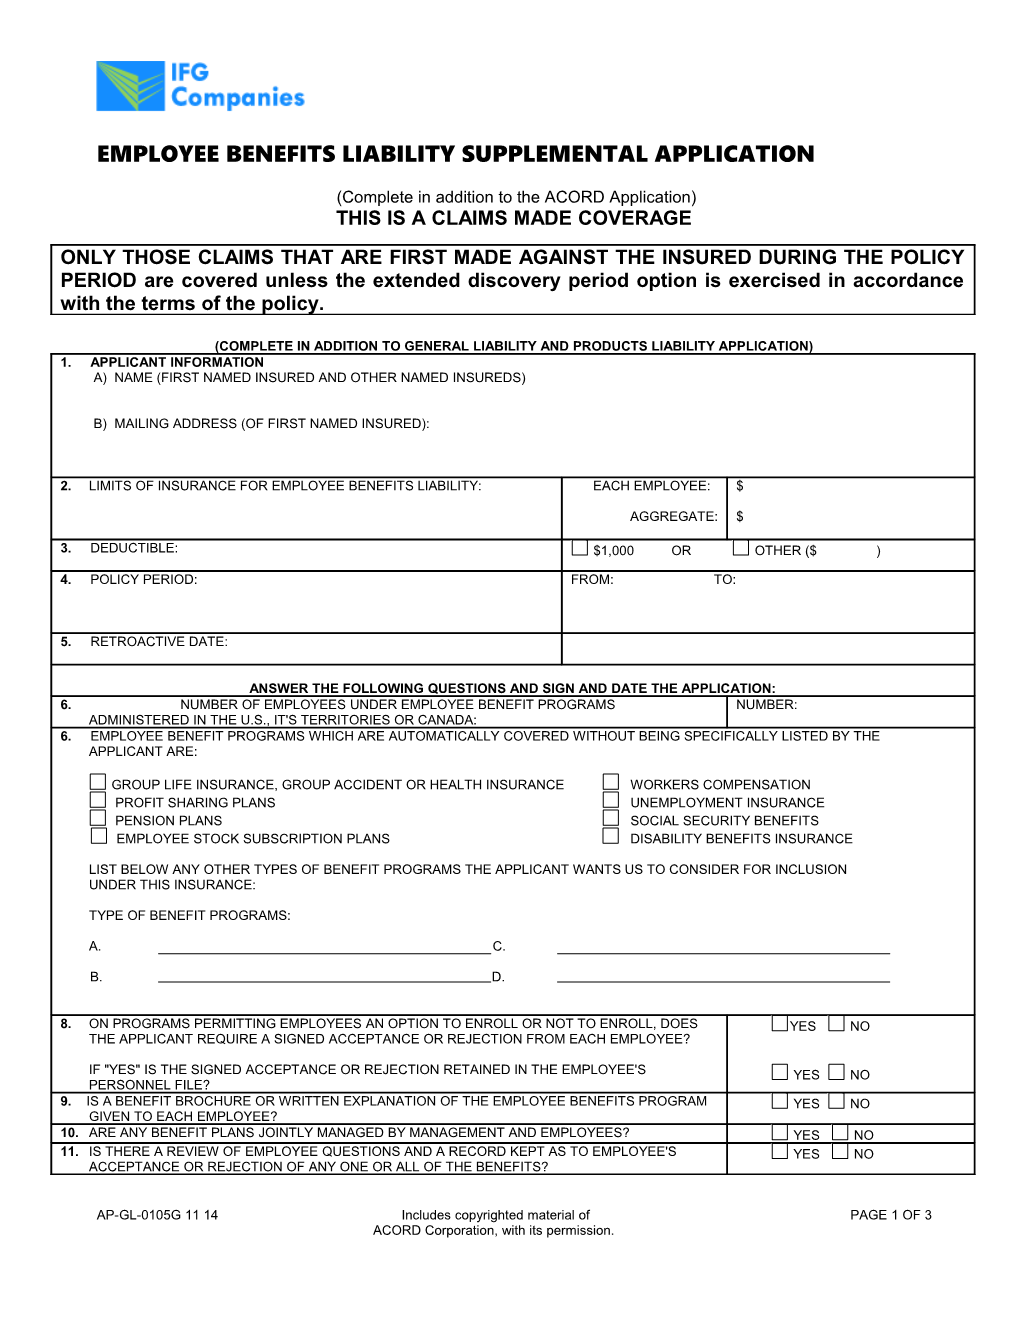 Supplemental Application for Employee Benefits Liability Insurance (Page 1)